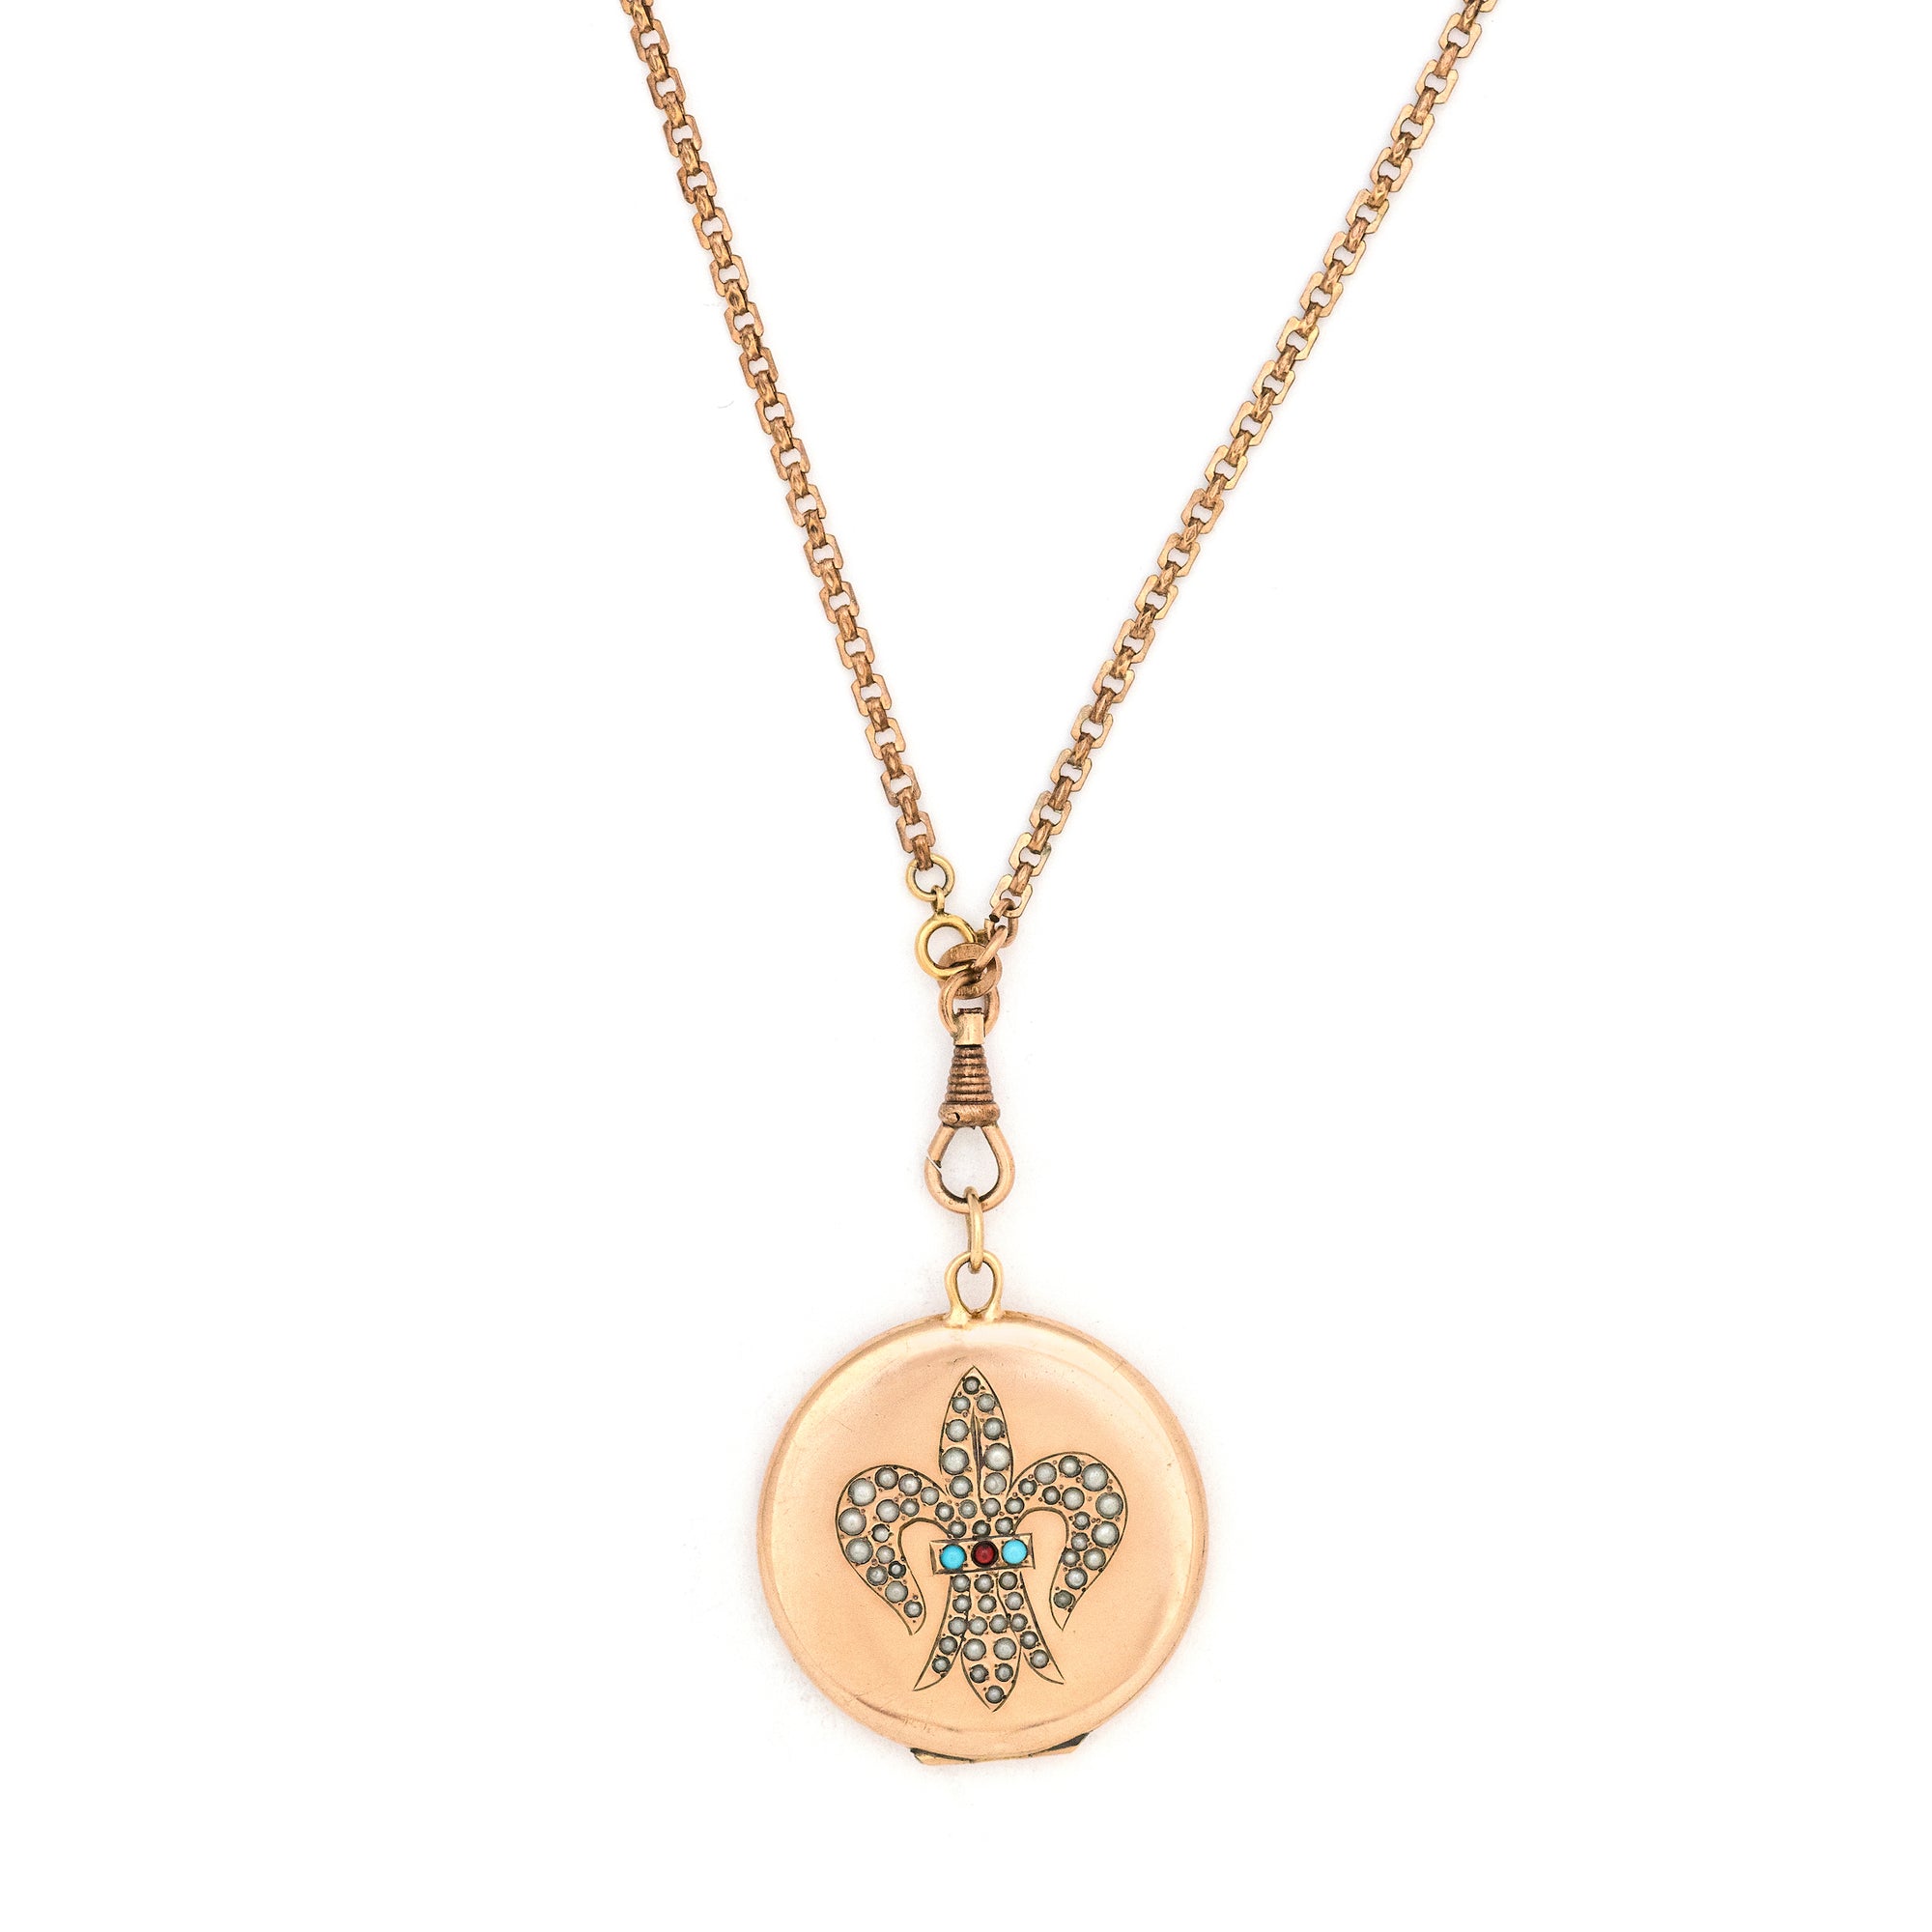 Turquoise & Pearl Fleur De Lis Antique Locket, gold fill locket perfect for holding pictures and photos, front view